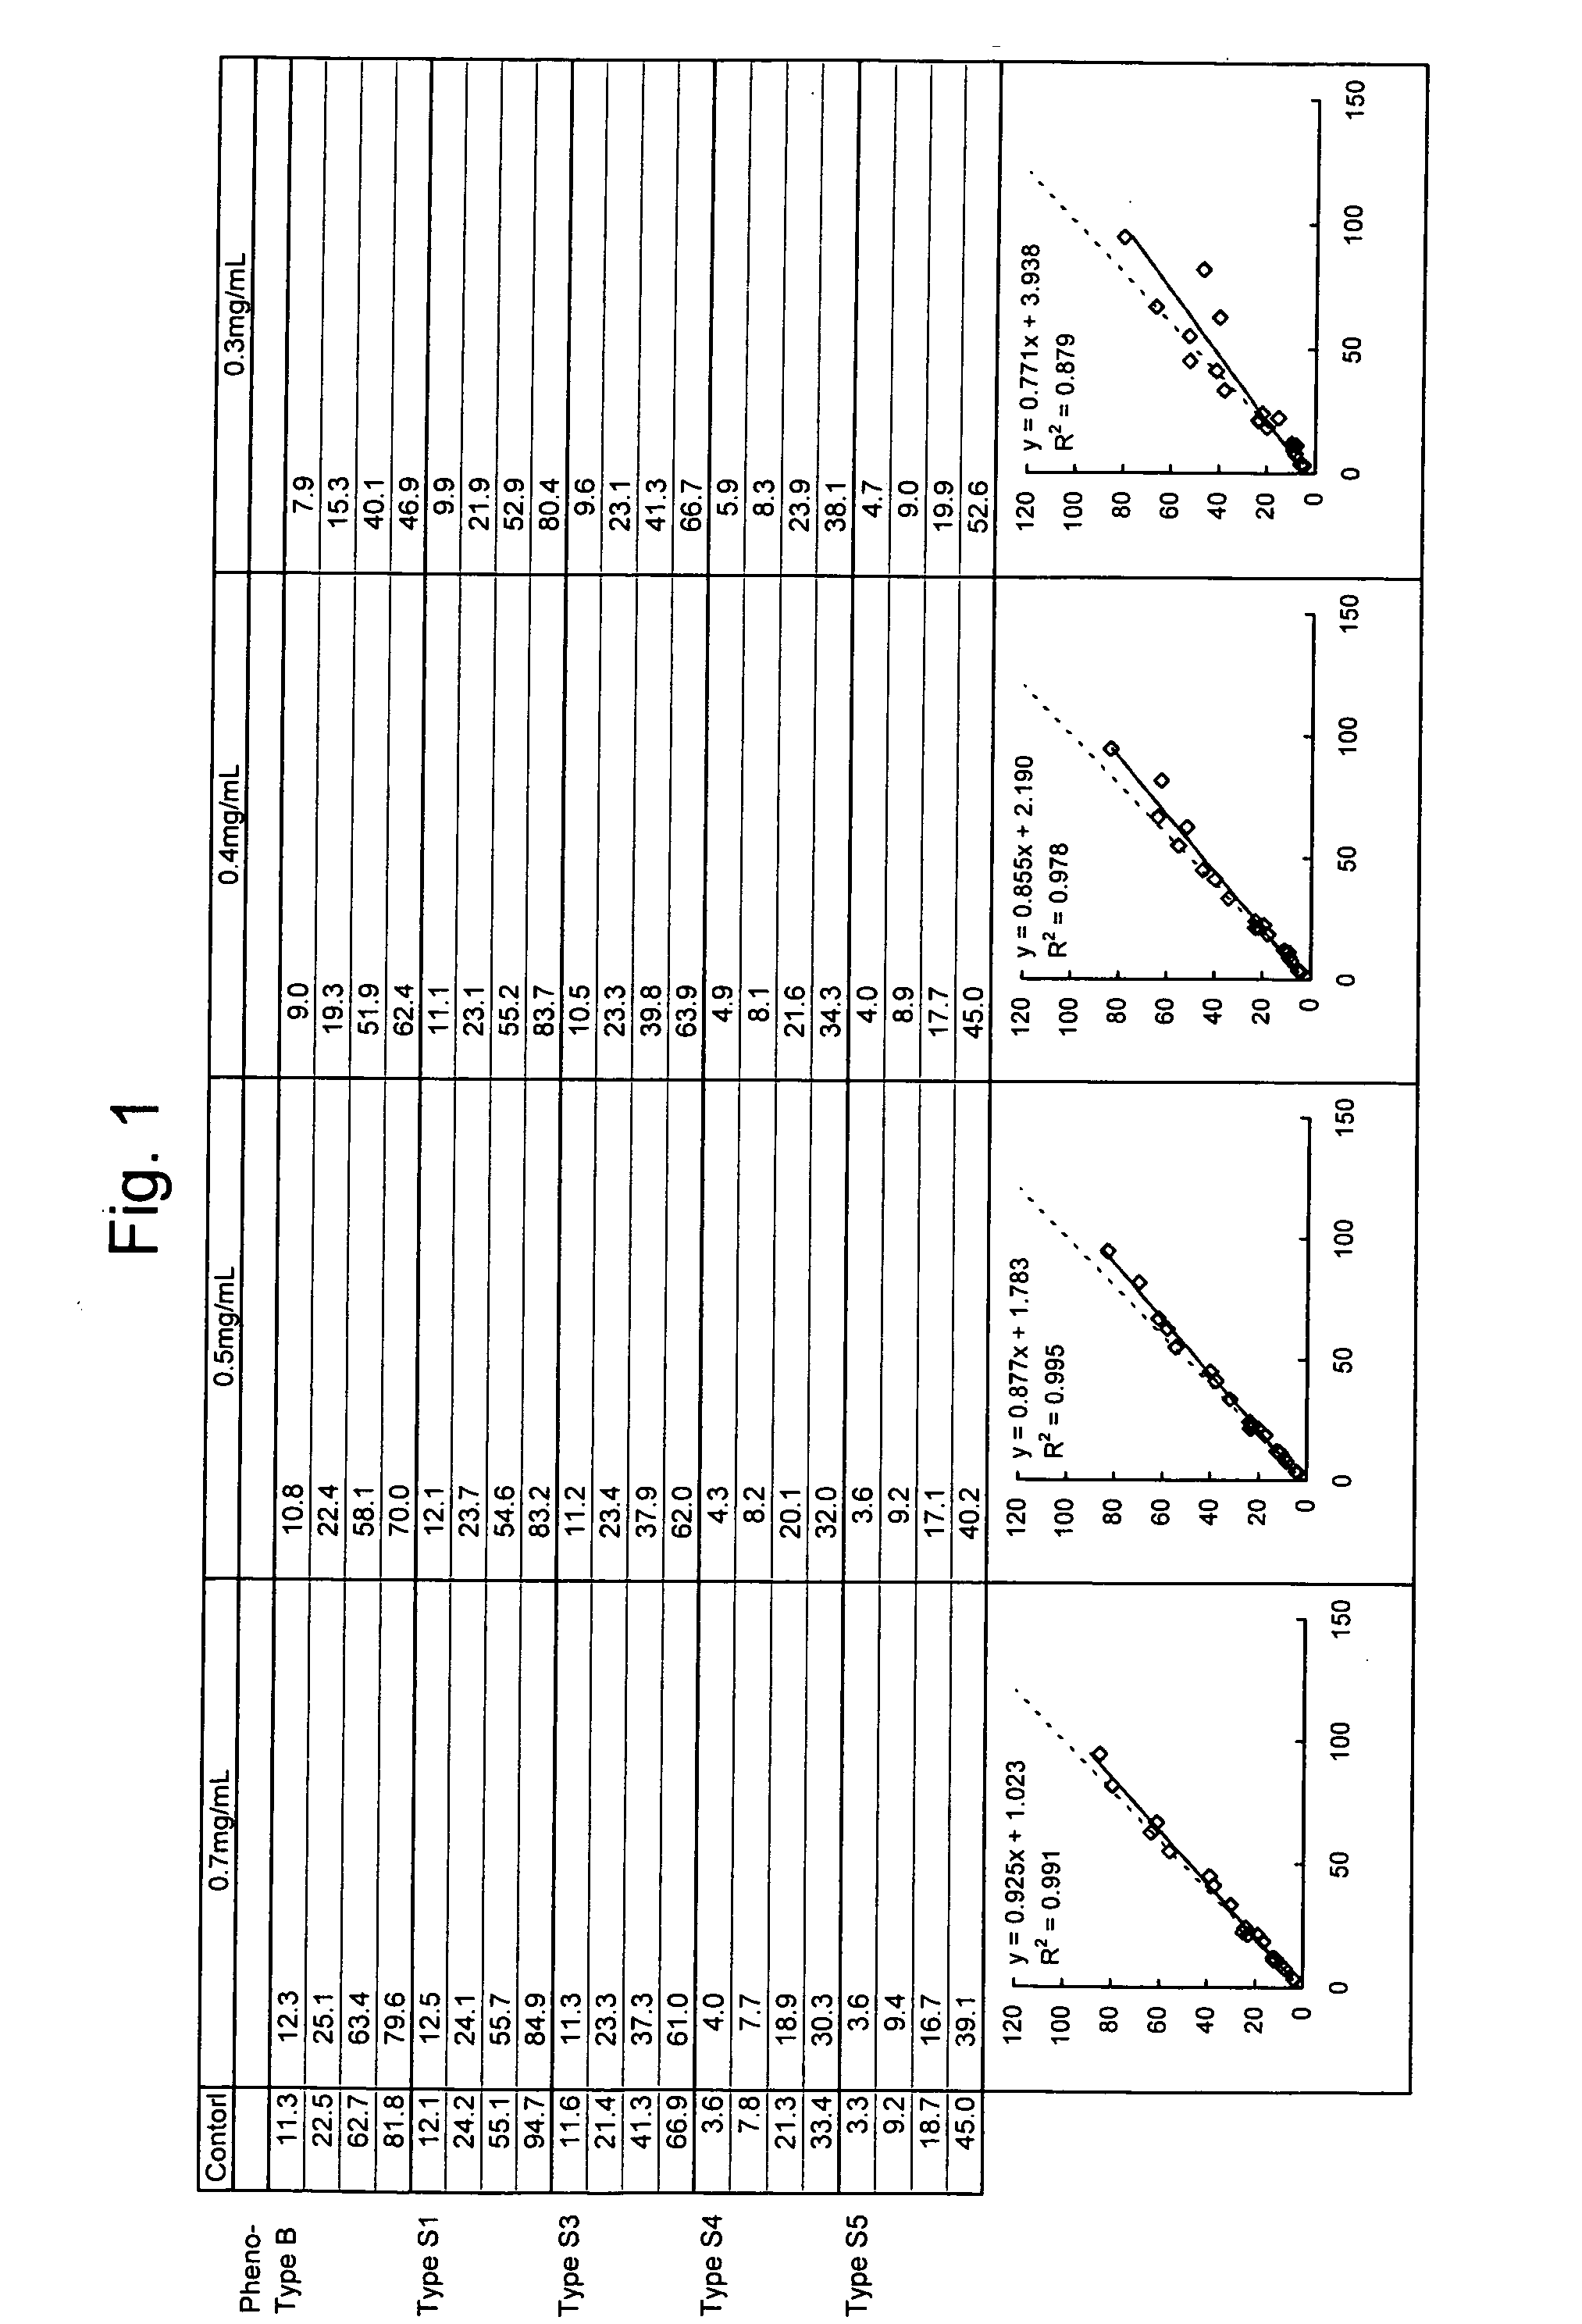 Immuno-nephelometry of lipoprotein (a) and reagent therefor